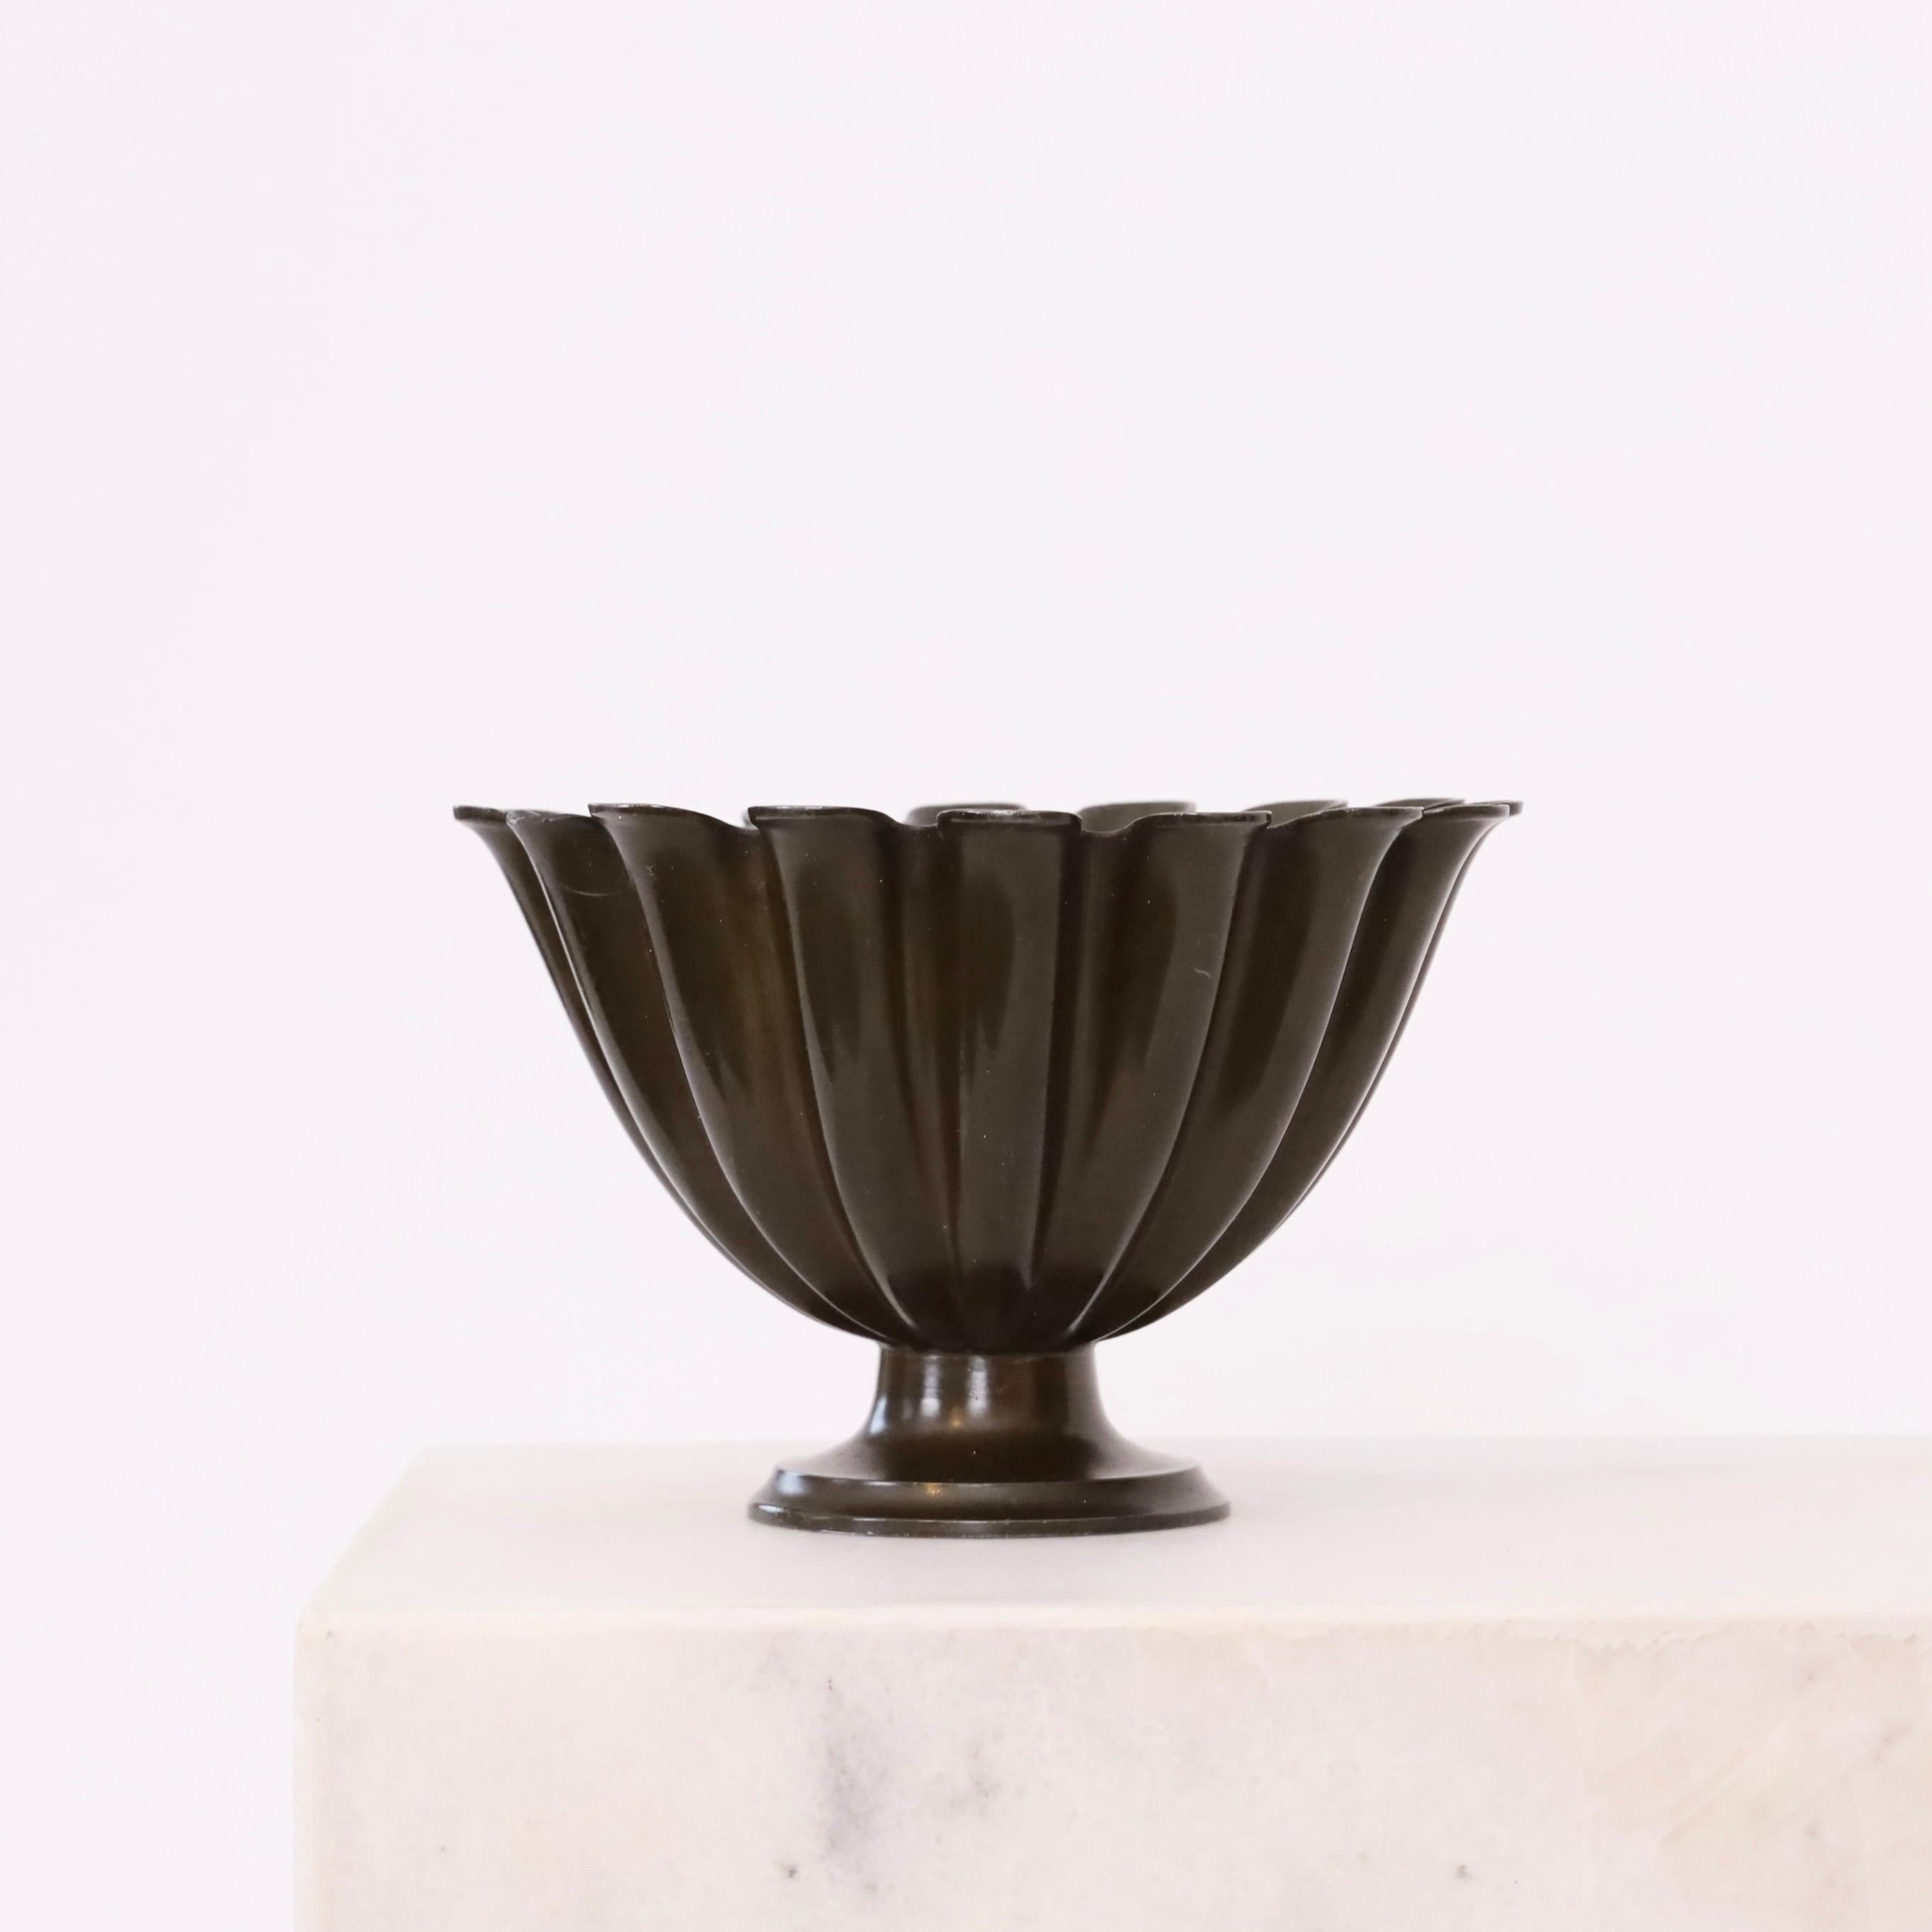 Early 20th Century Scalloped pedestal discometal bowl by Just Andersen 1920s, Denmark For Sale